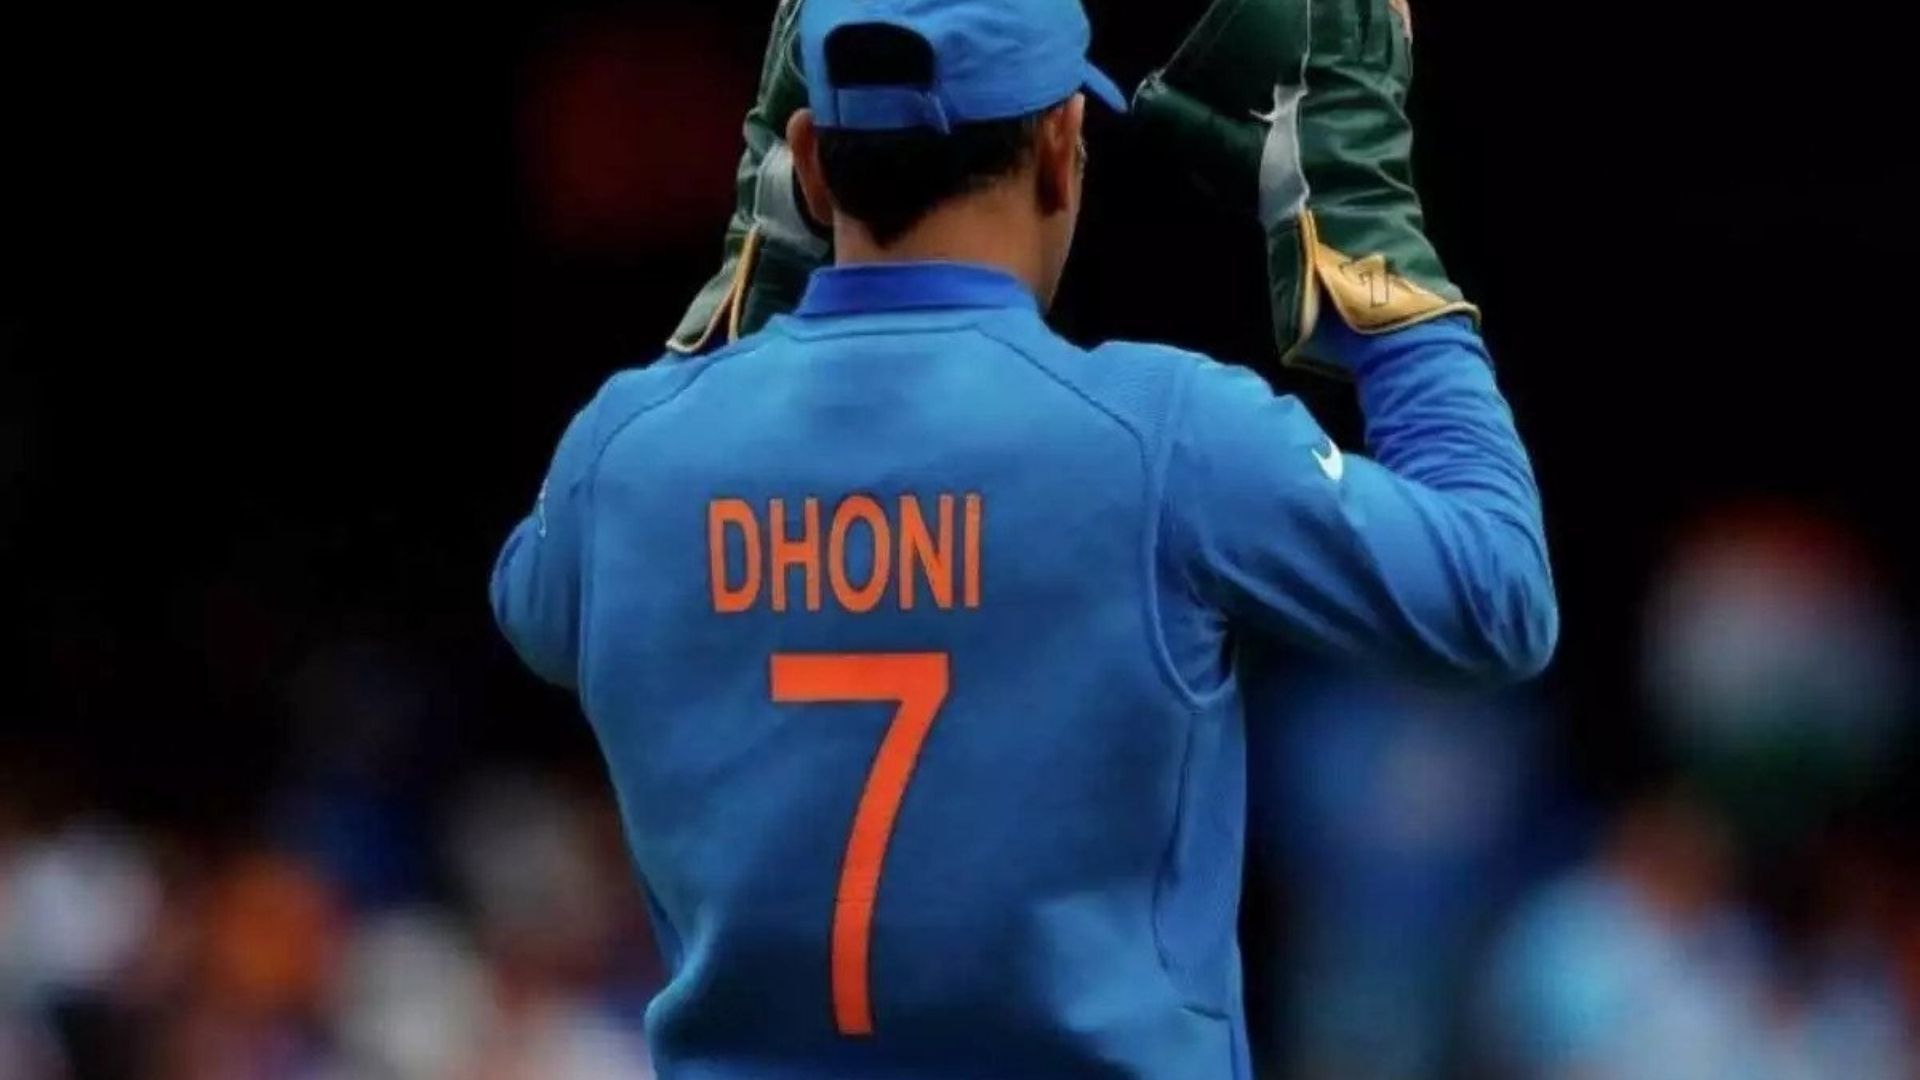 MS Dhoni with the iconic No.7 jersey (P.C.: Twitter)